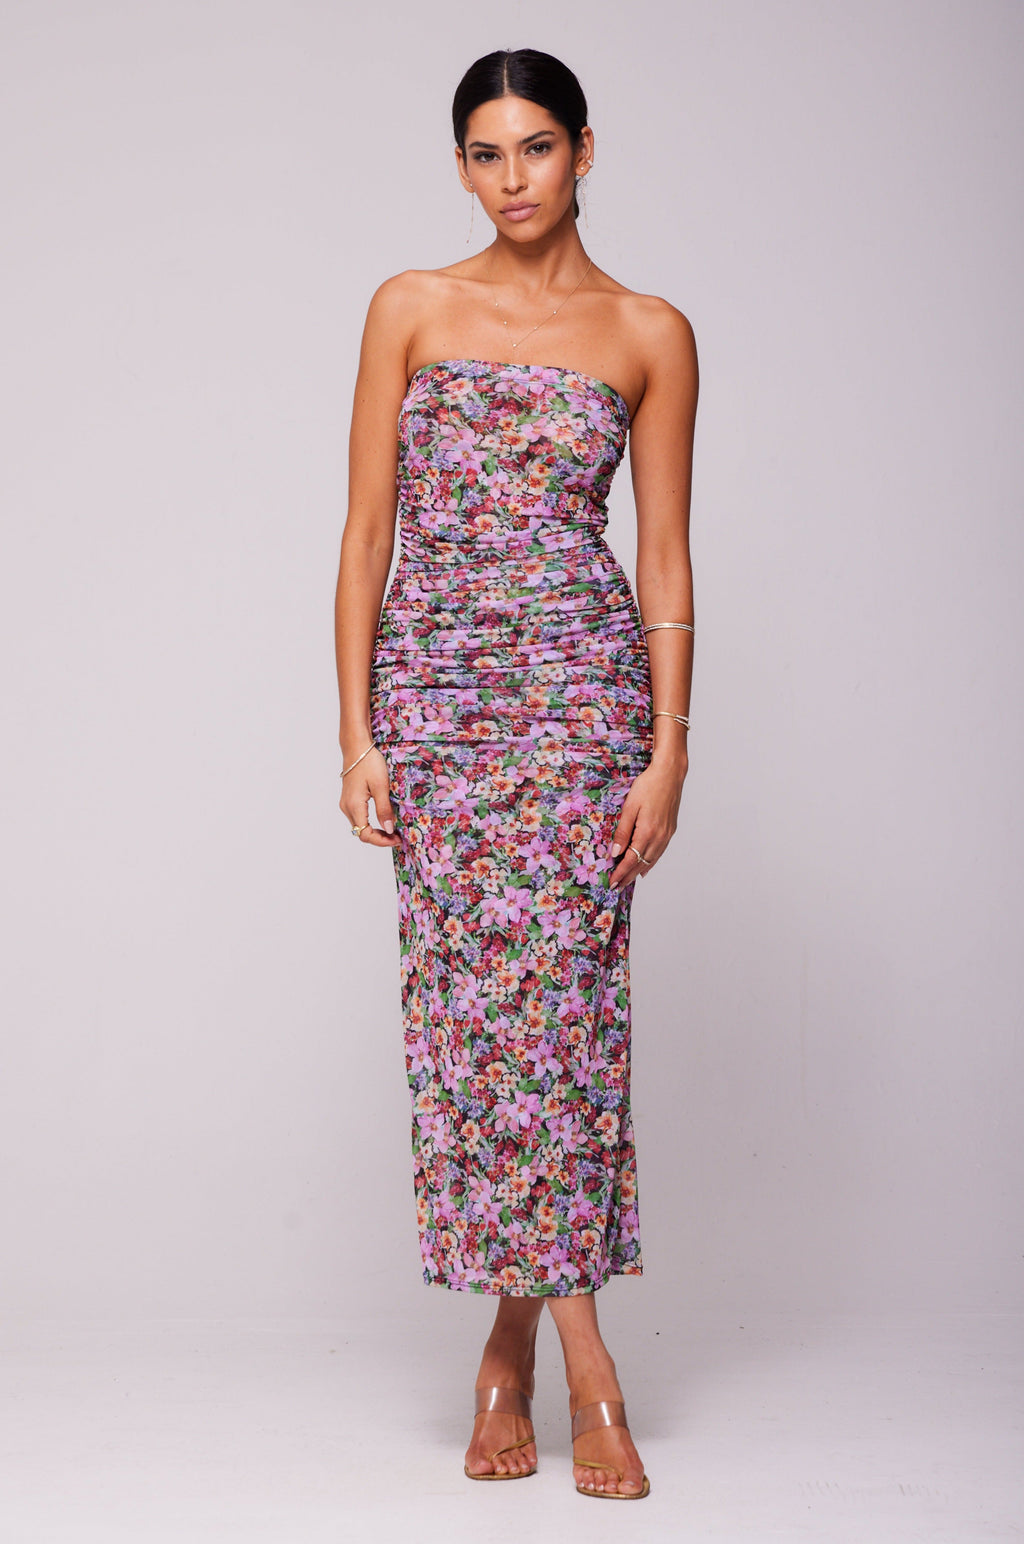 This is an image of Kristina Midi in Bloom - RESA featuring a model wearing the dress